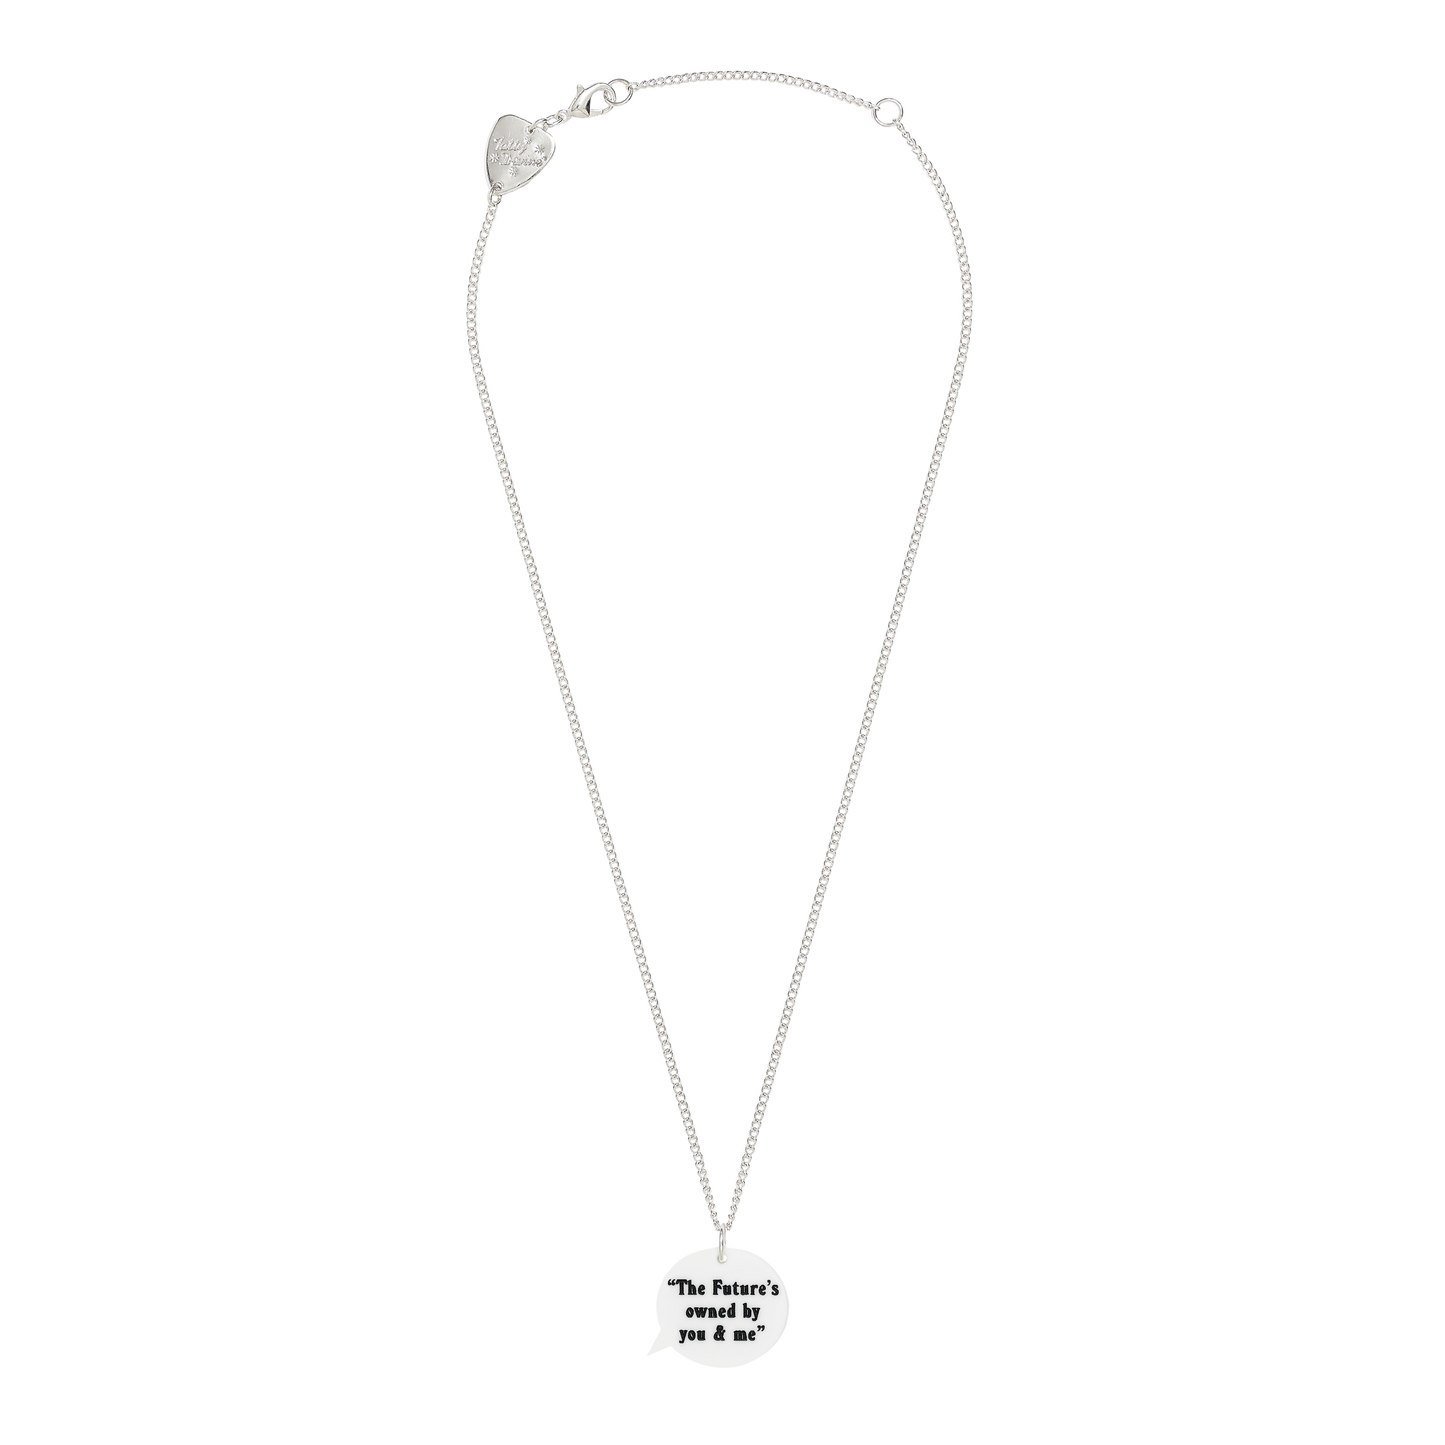 Tatty Devine x Pulp Speech Bubble Necklace - The Future’s Owned